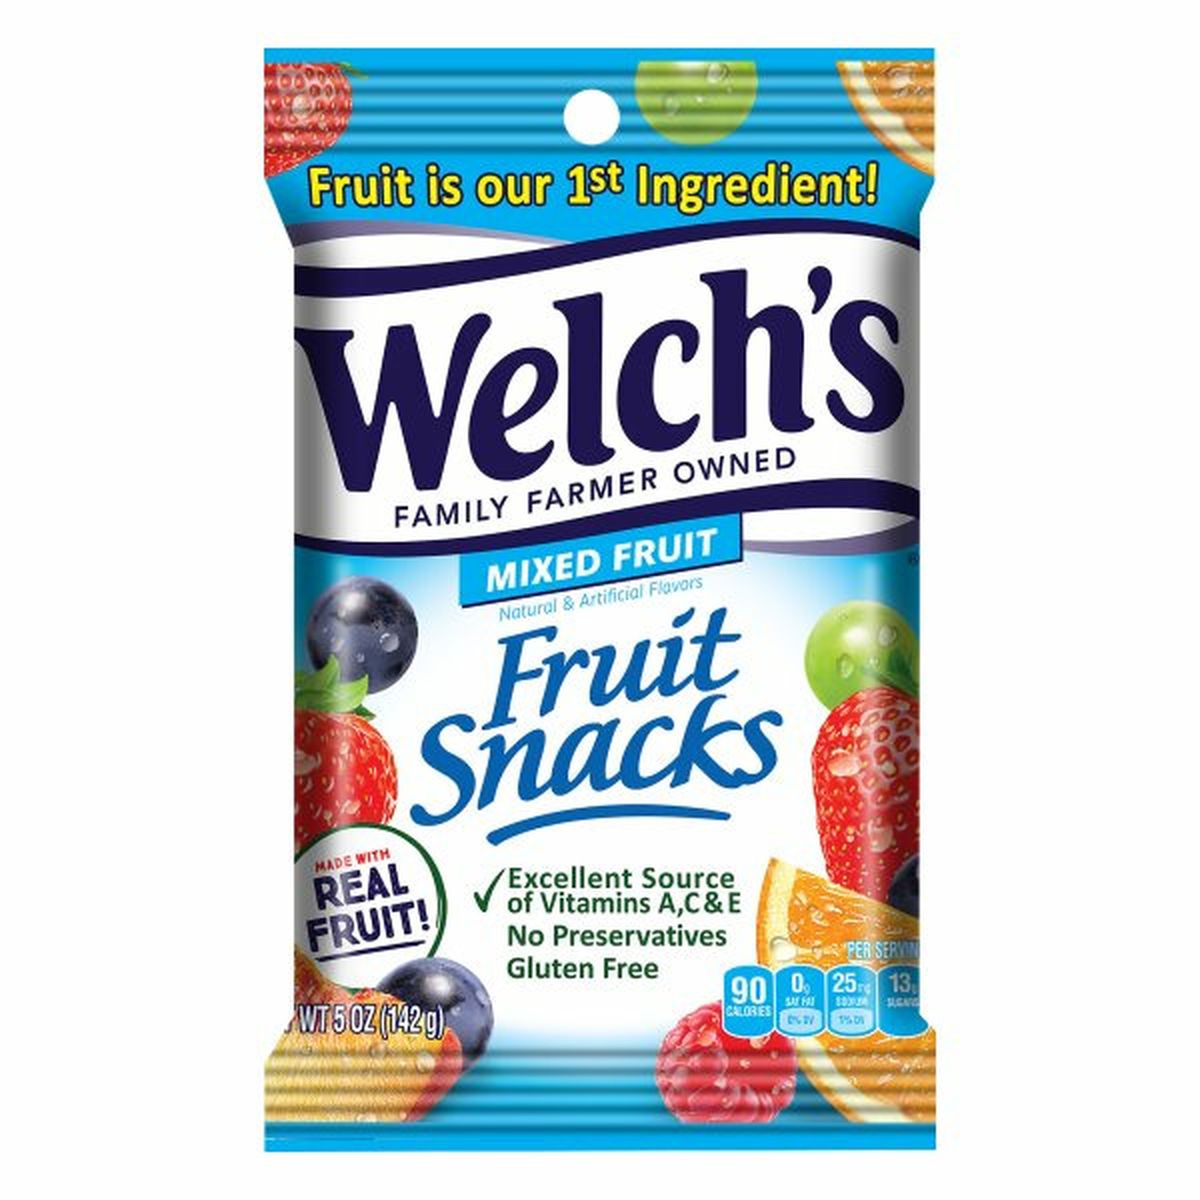 Calories in Welch's Fruit Snacks, Mixed Fruit